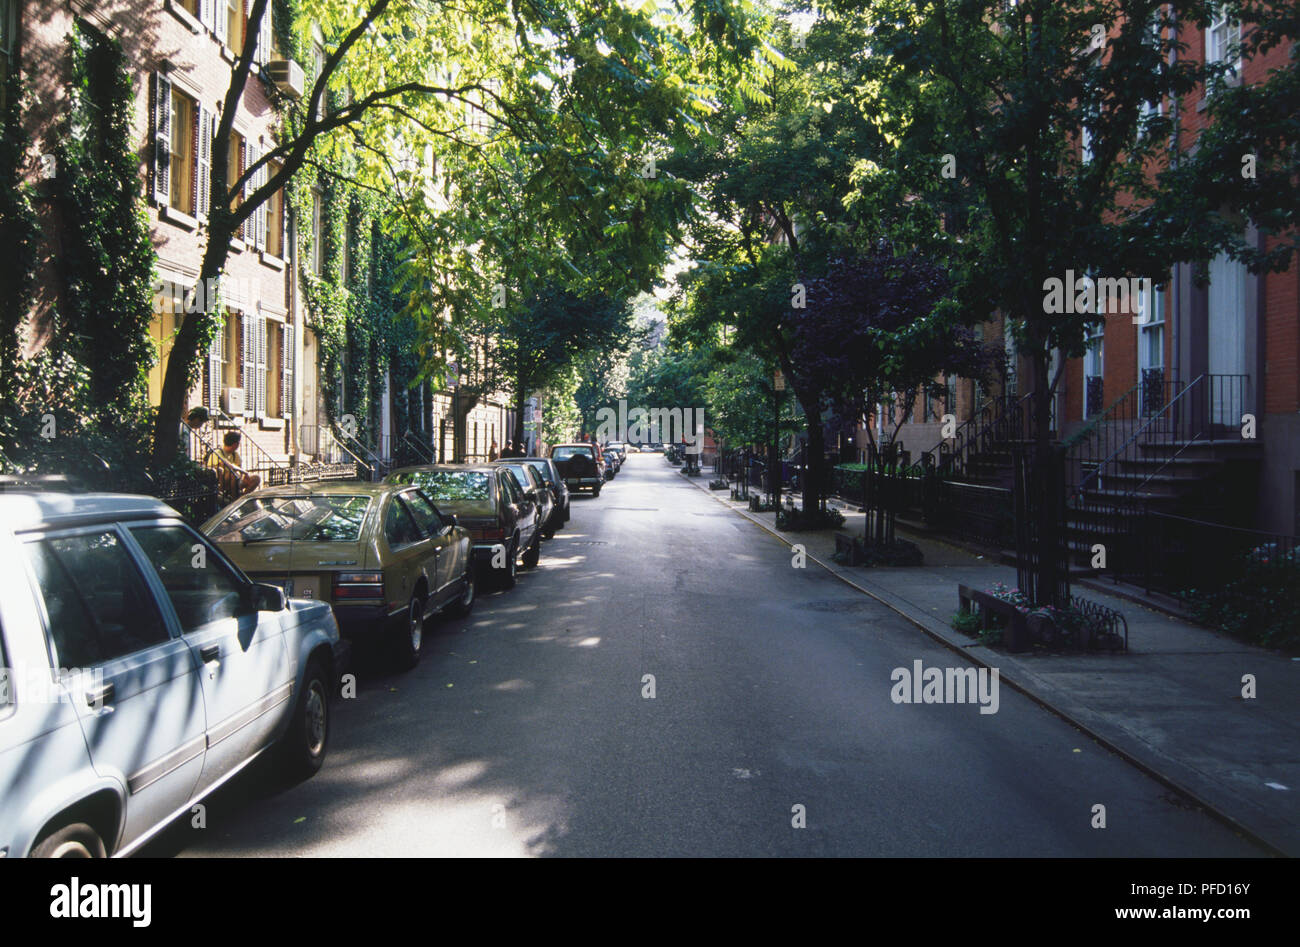 USA, New York, Manhattan, Greenwich Village, tree-lined street with cars parked on one side. Stock Photo